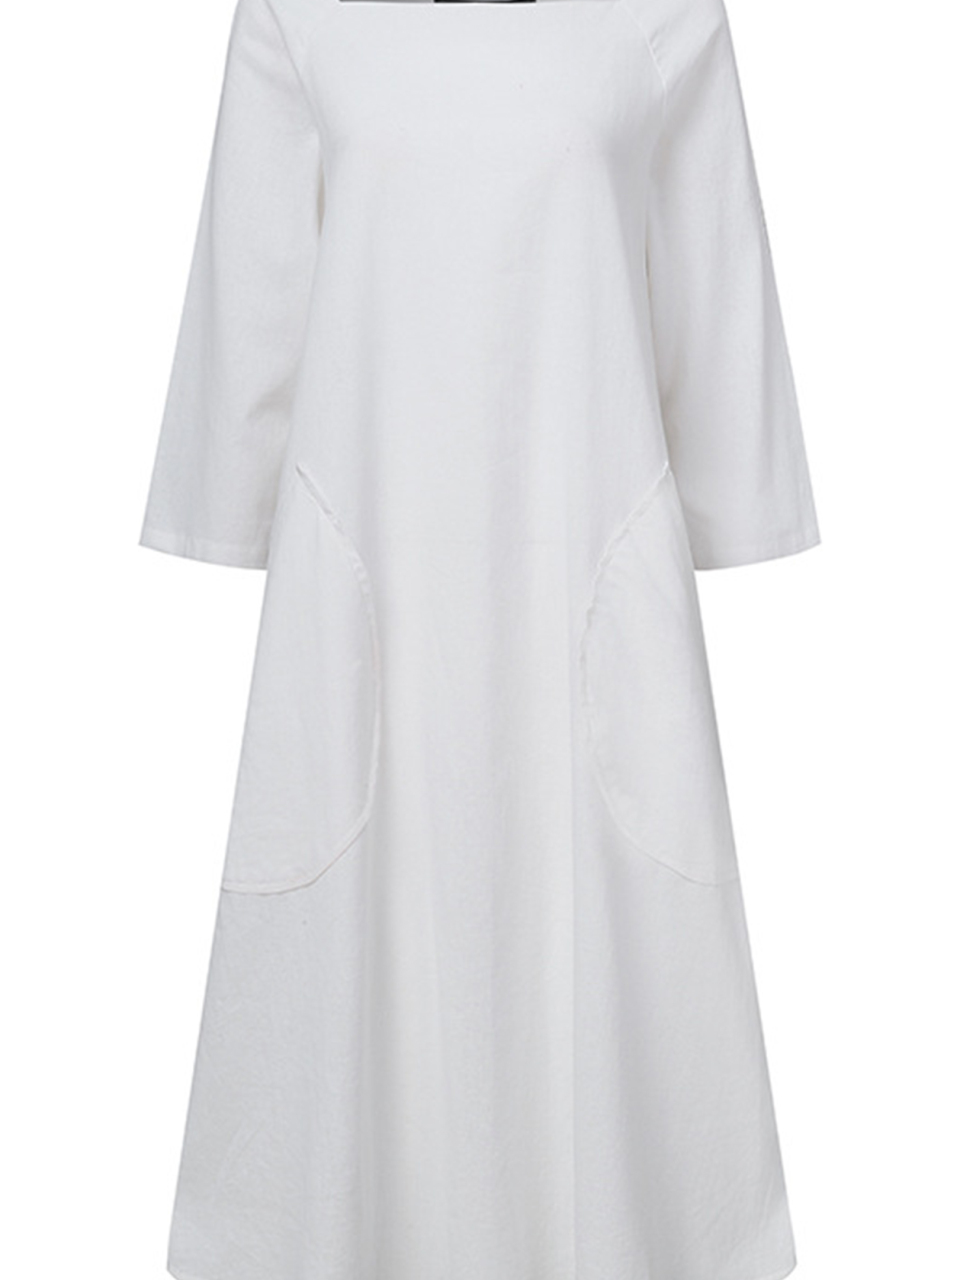 Women's Plain Cotton Casual Dress With Square Collar And Pocket